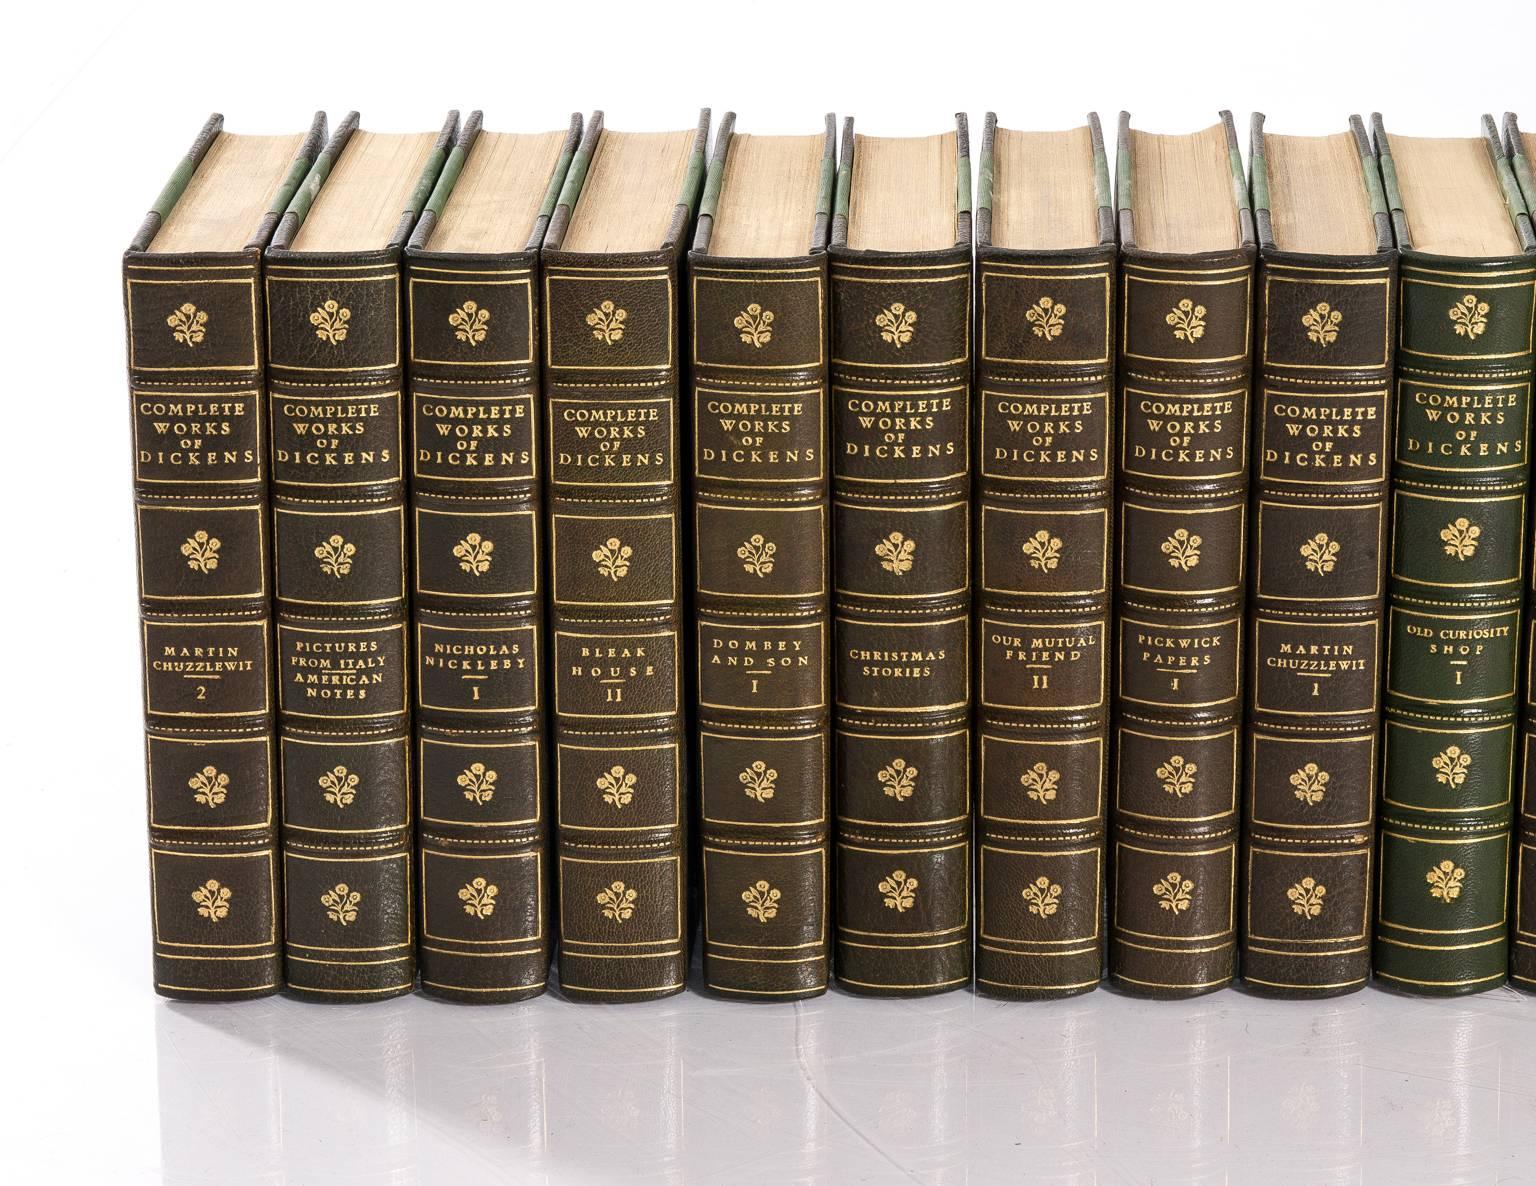 Complete Works of Dickens 30 Volumes 1